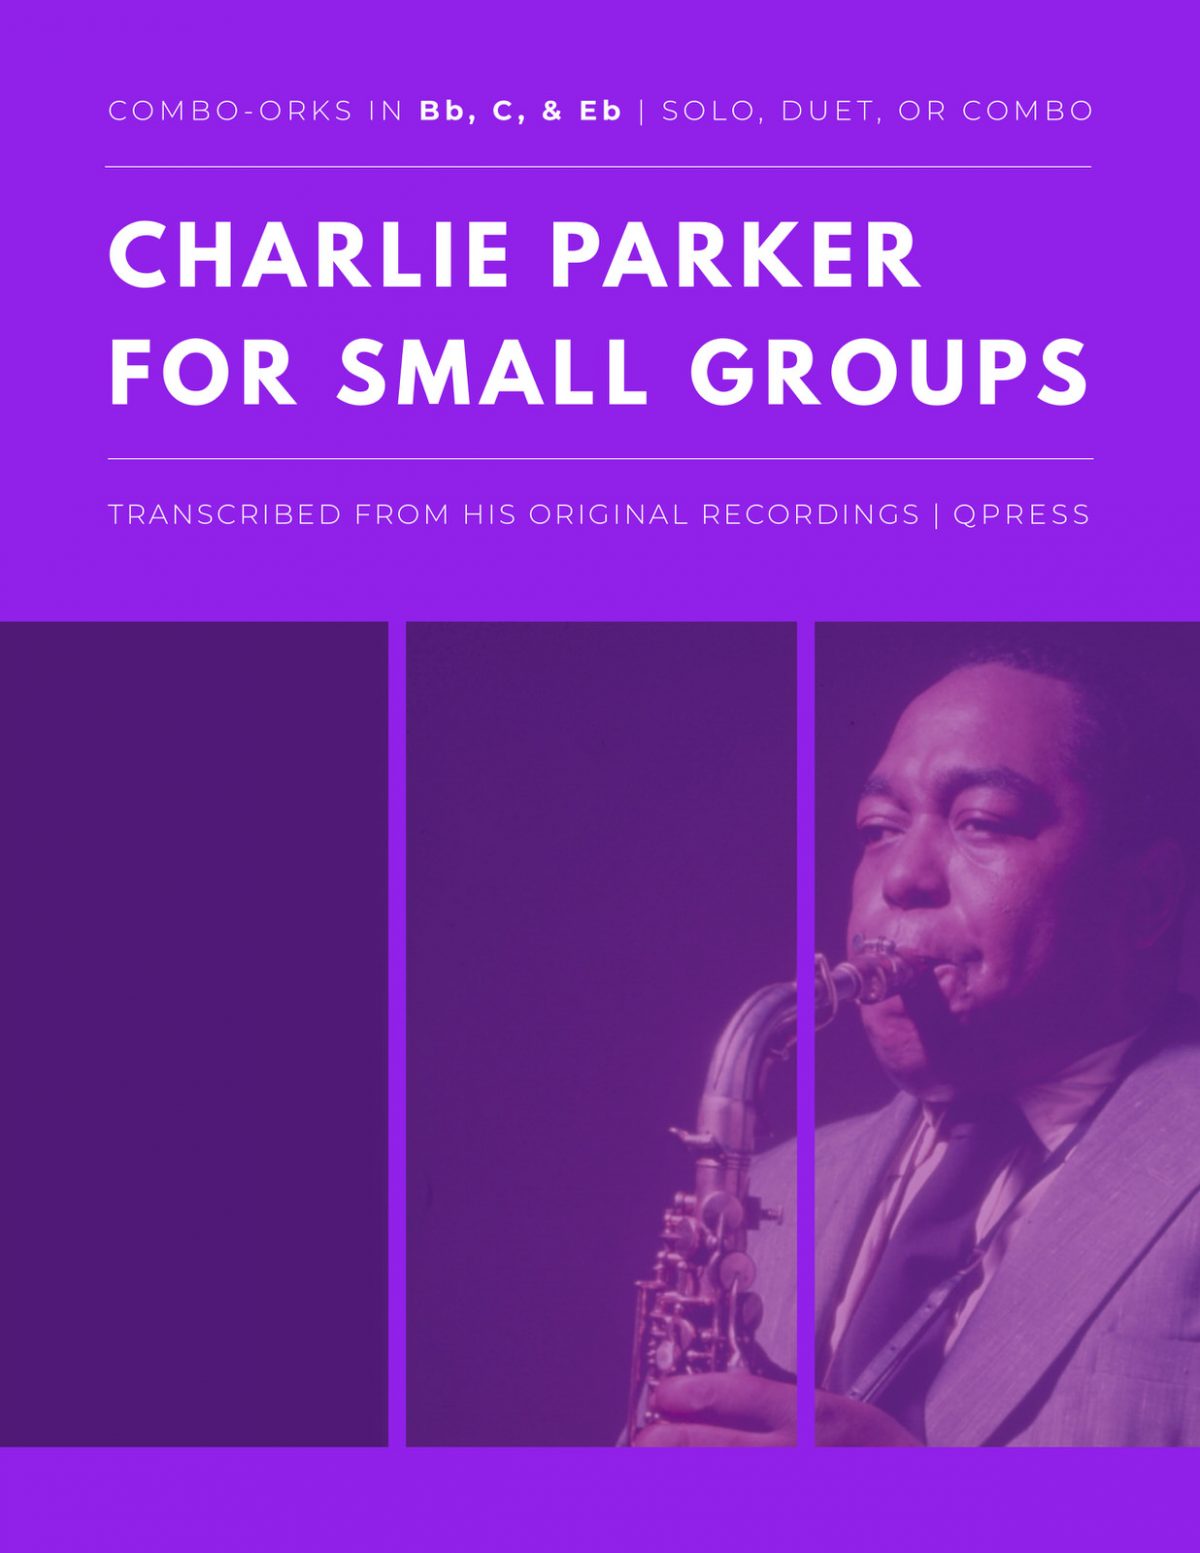 Charlie Parker for Small Groups (Combo-Orks)